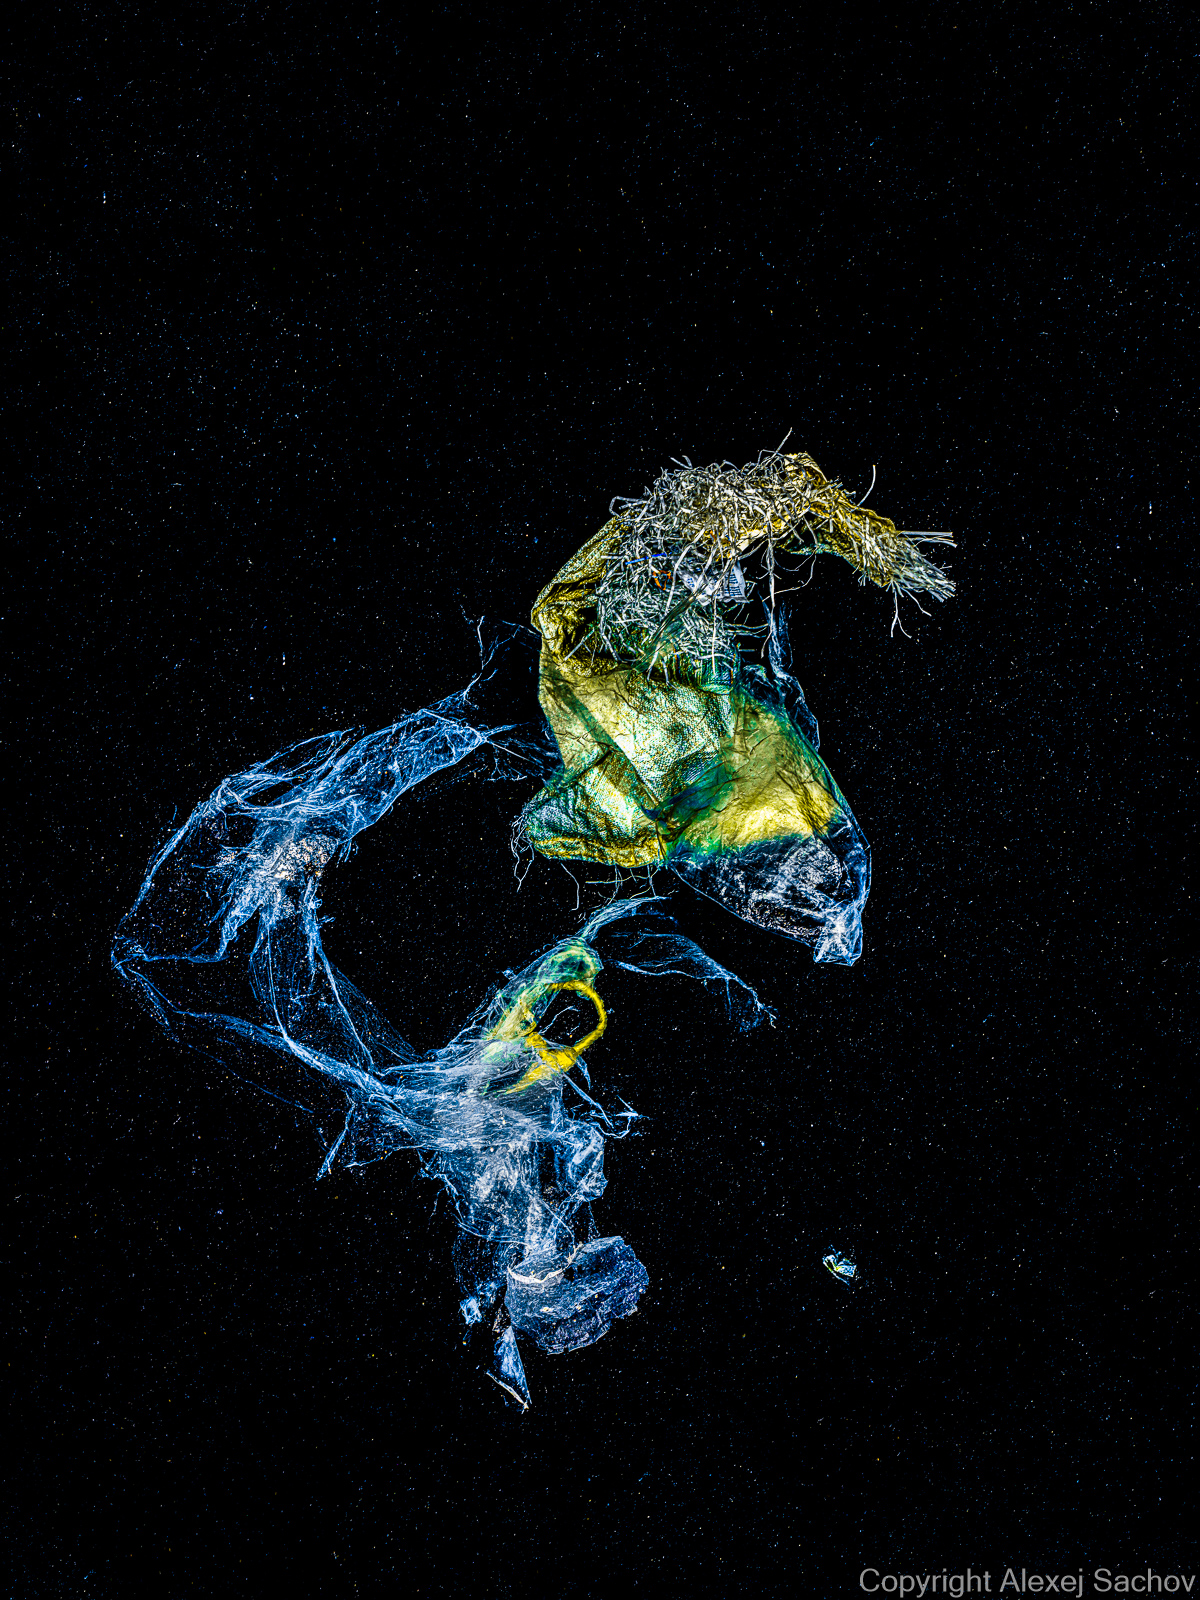 In 'Neptune's Steed', an equine silhouette, born of discarded plastic, leaps powerfully as if mid-gallop. A chilling reminder of our rampant waste, this aquatic specter echoes the wild spirit of an unnatural era.